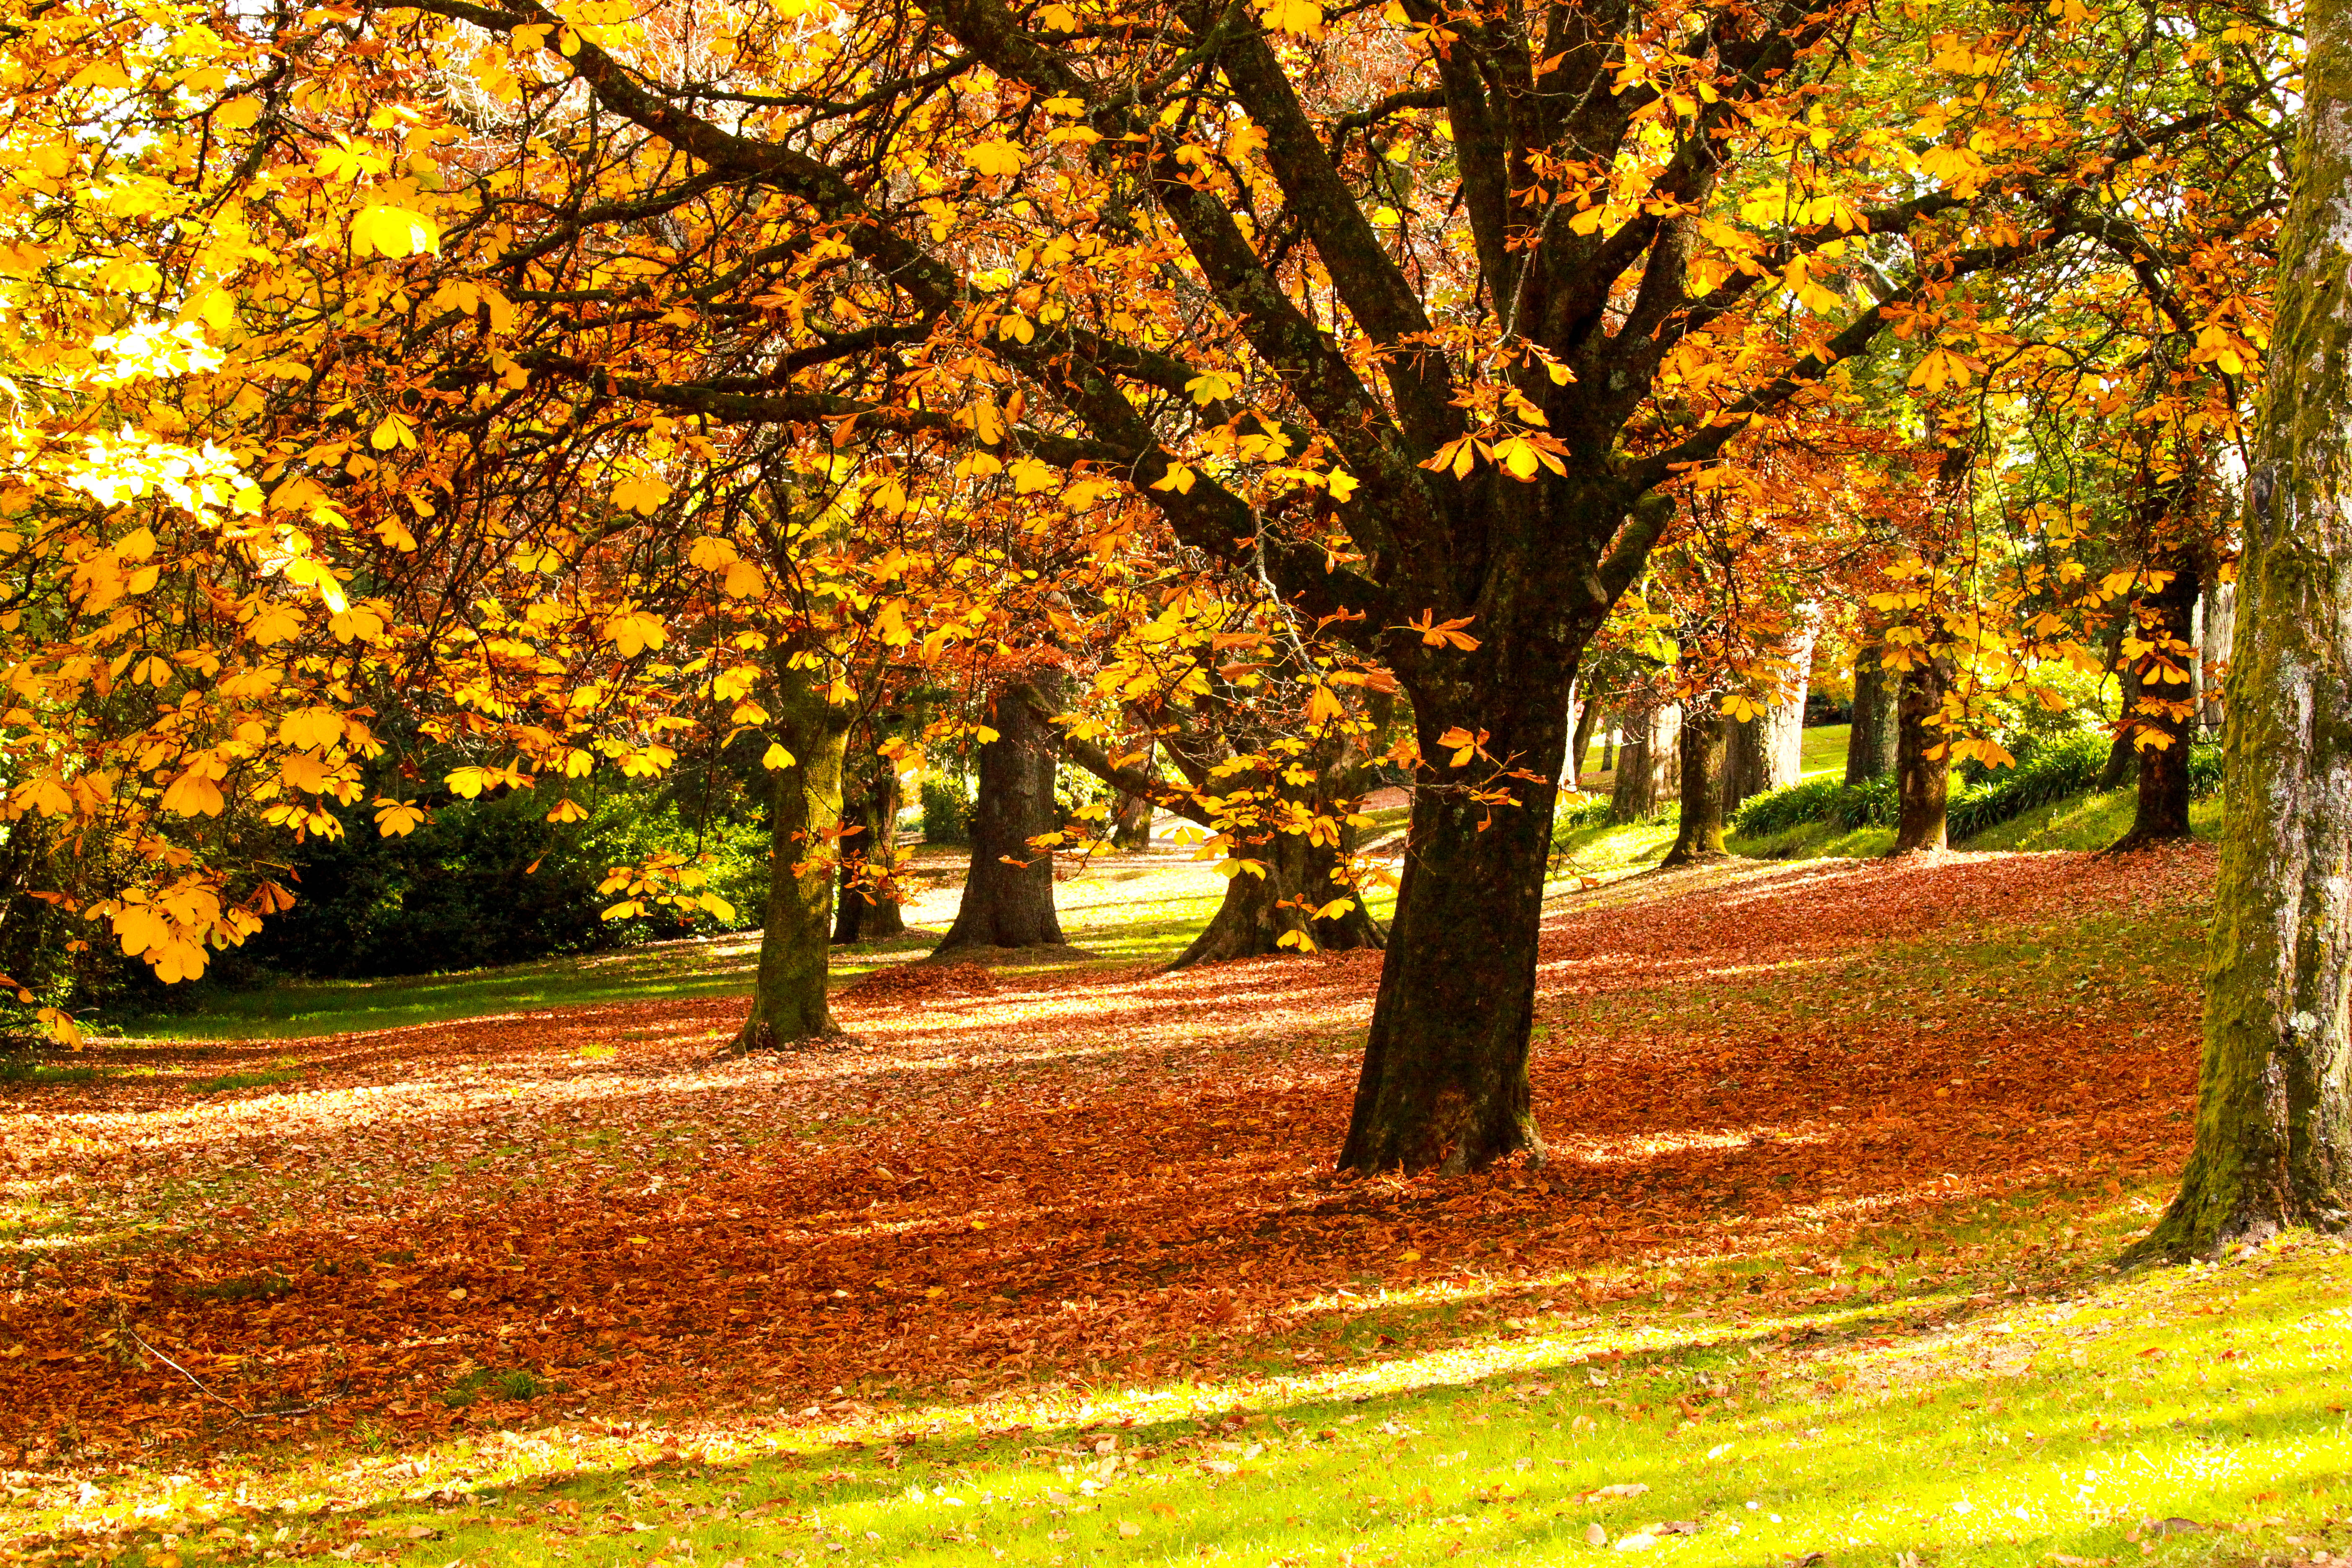 Wallpaper, voyage, park, autumn, trees, vacation, orange, plant, colour, tree, fall, nature, leaves, Canon, season, colorful, warm, outdoor, natur, visit, Victoria, foliage, serene, daylesford 5616x3744